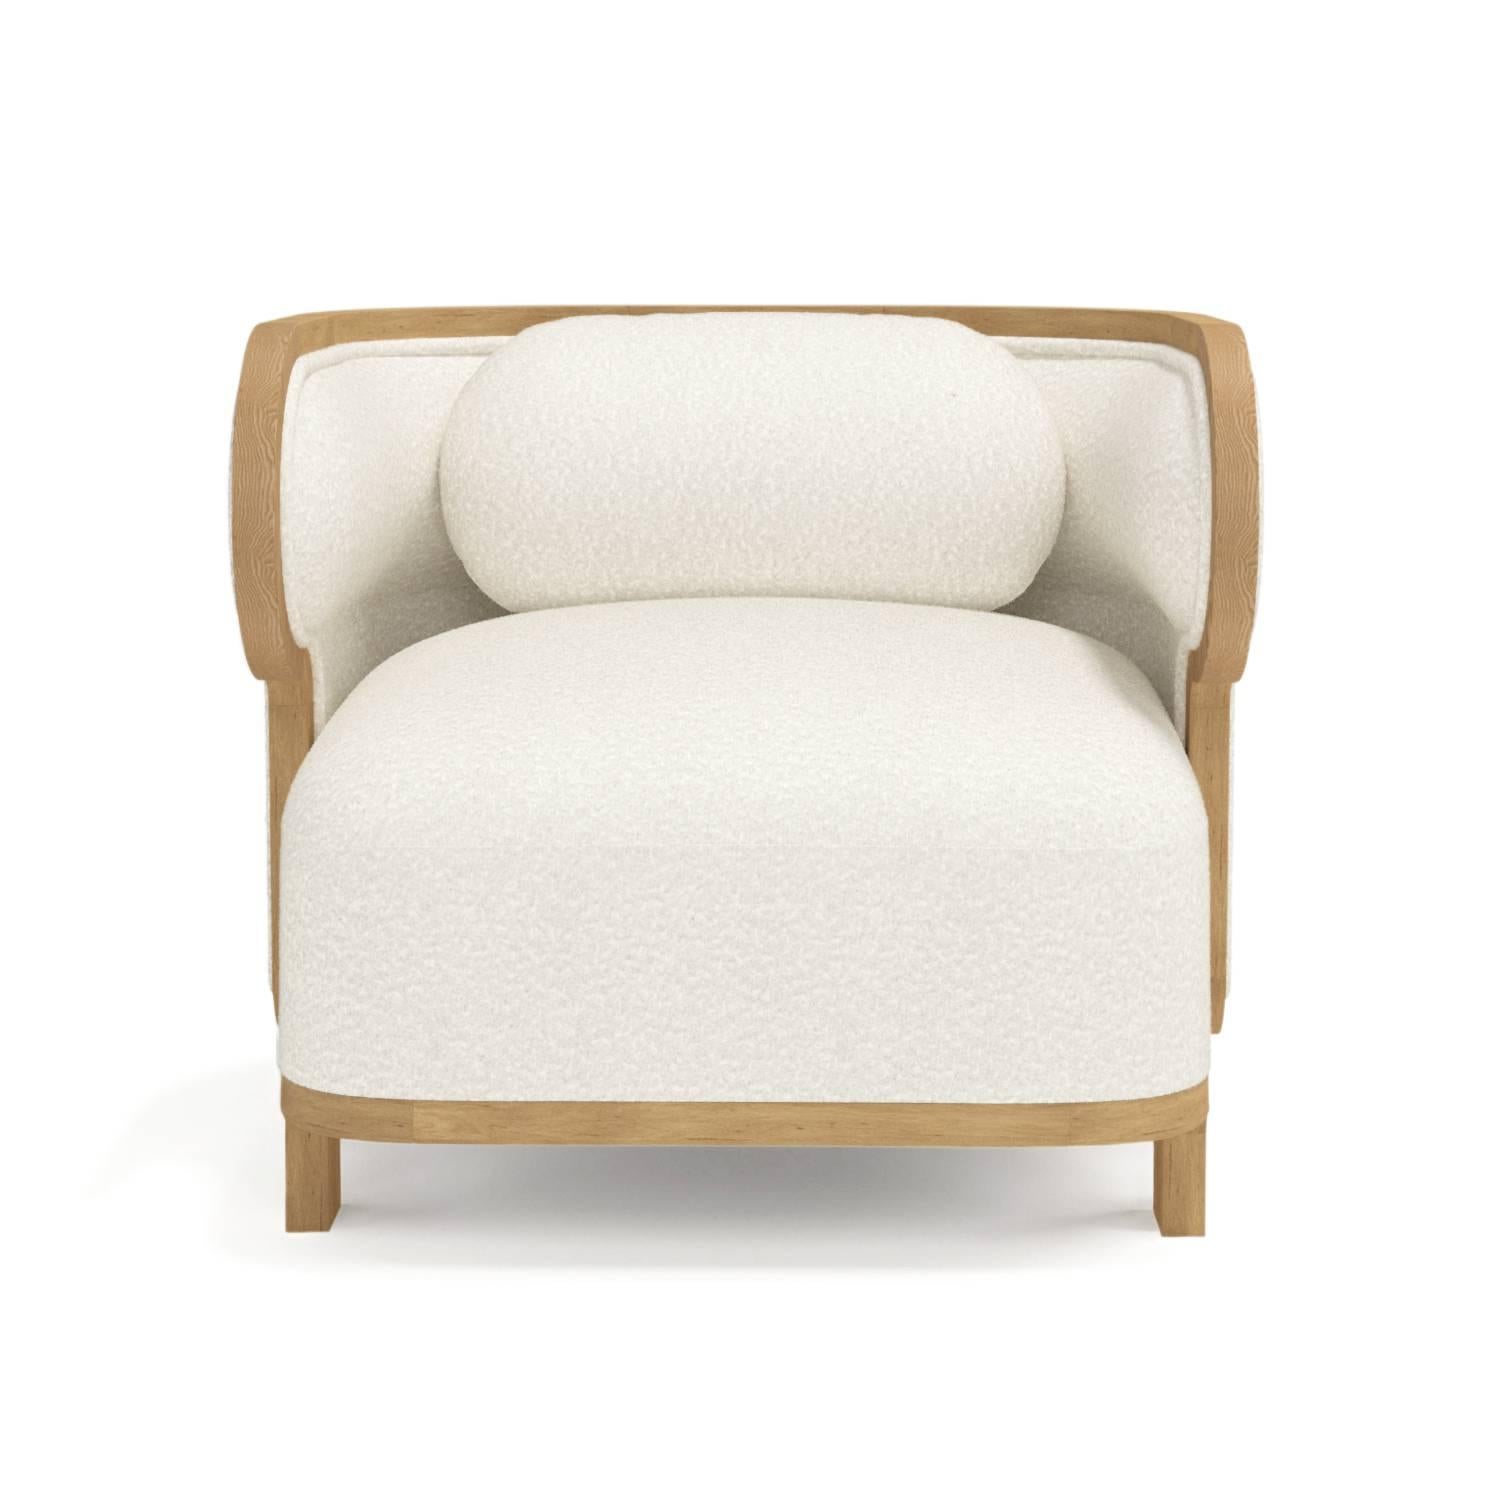 Modern Odette Curvy Club Chair with Oak Wood Frame by Fred&Juul For Sale